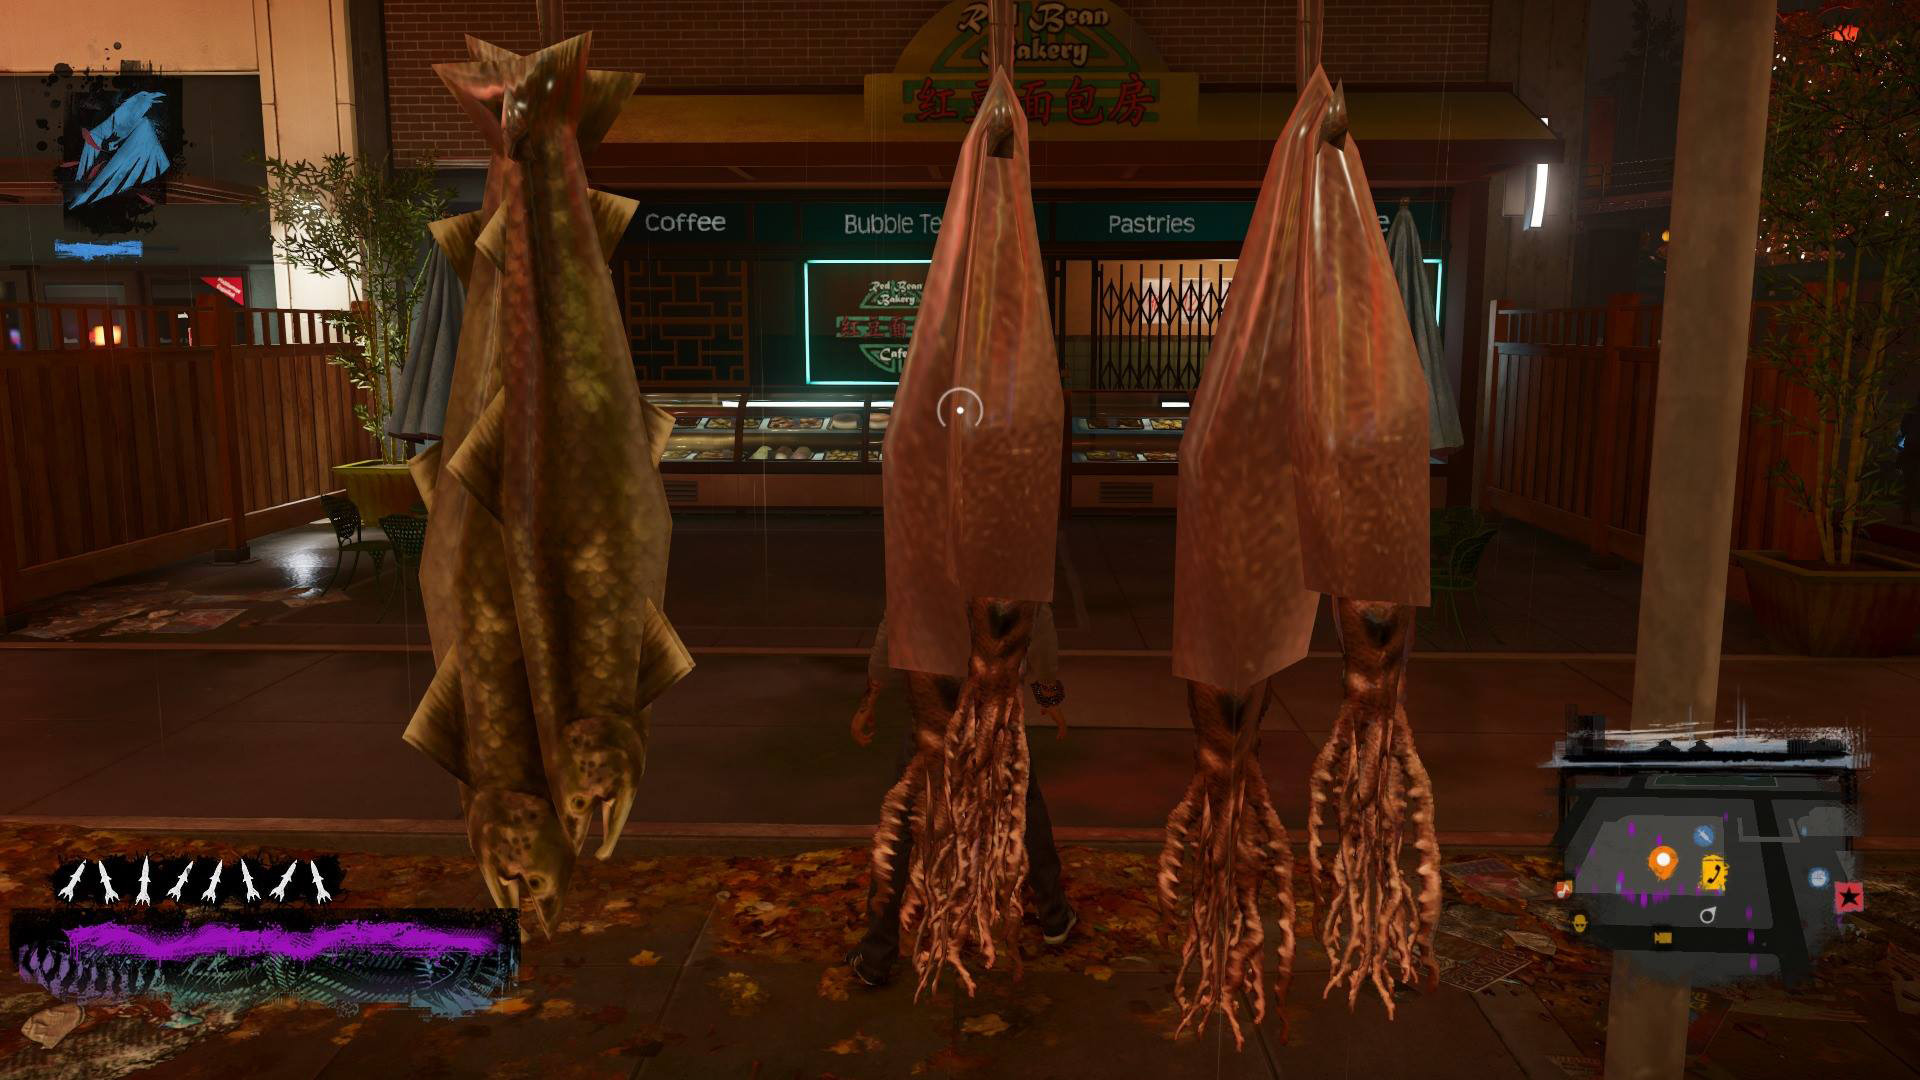 No Wonder Infamous: Second Son Makes Me So Hungry